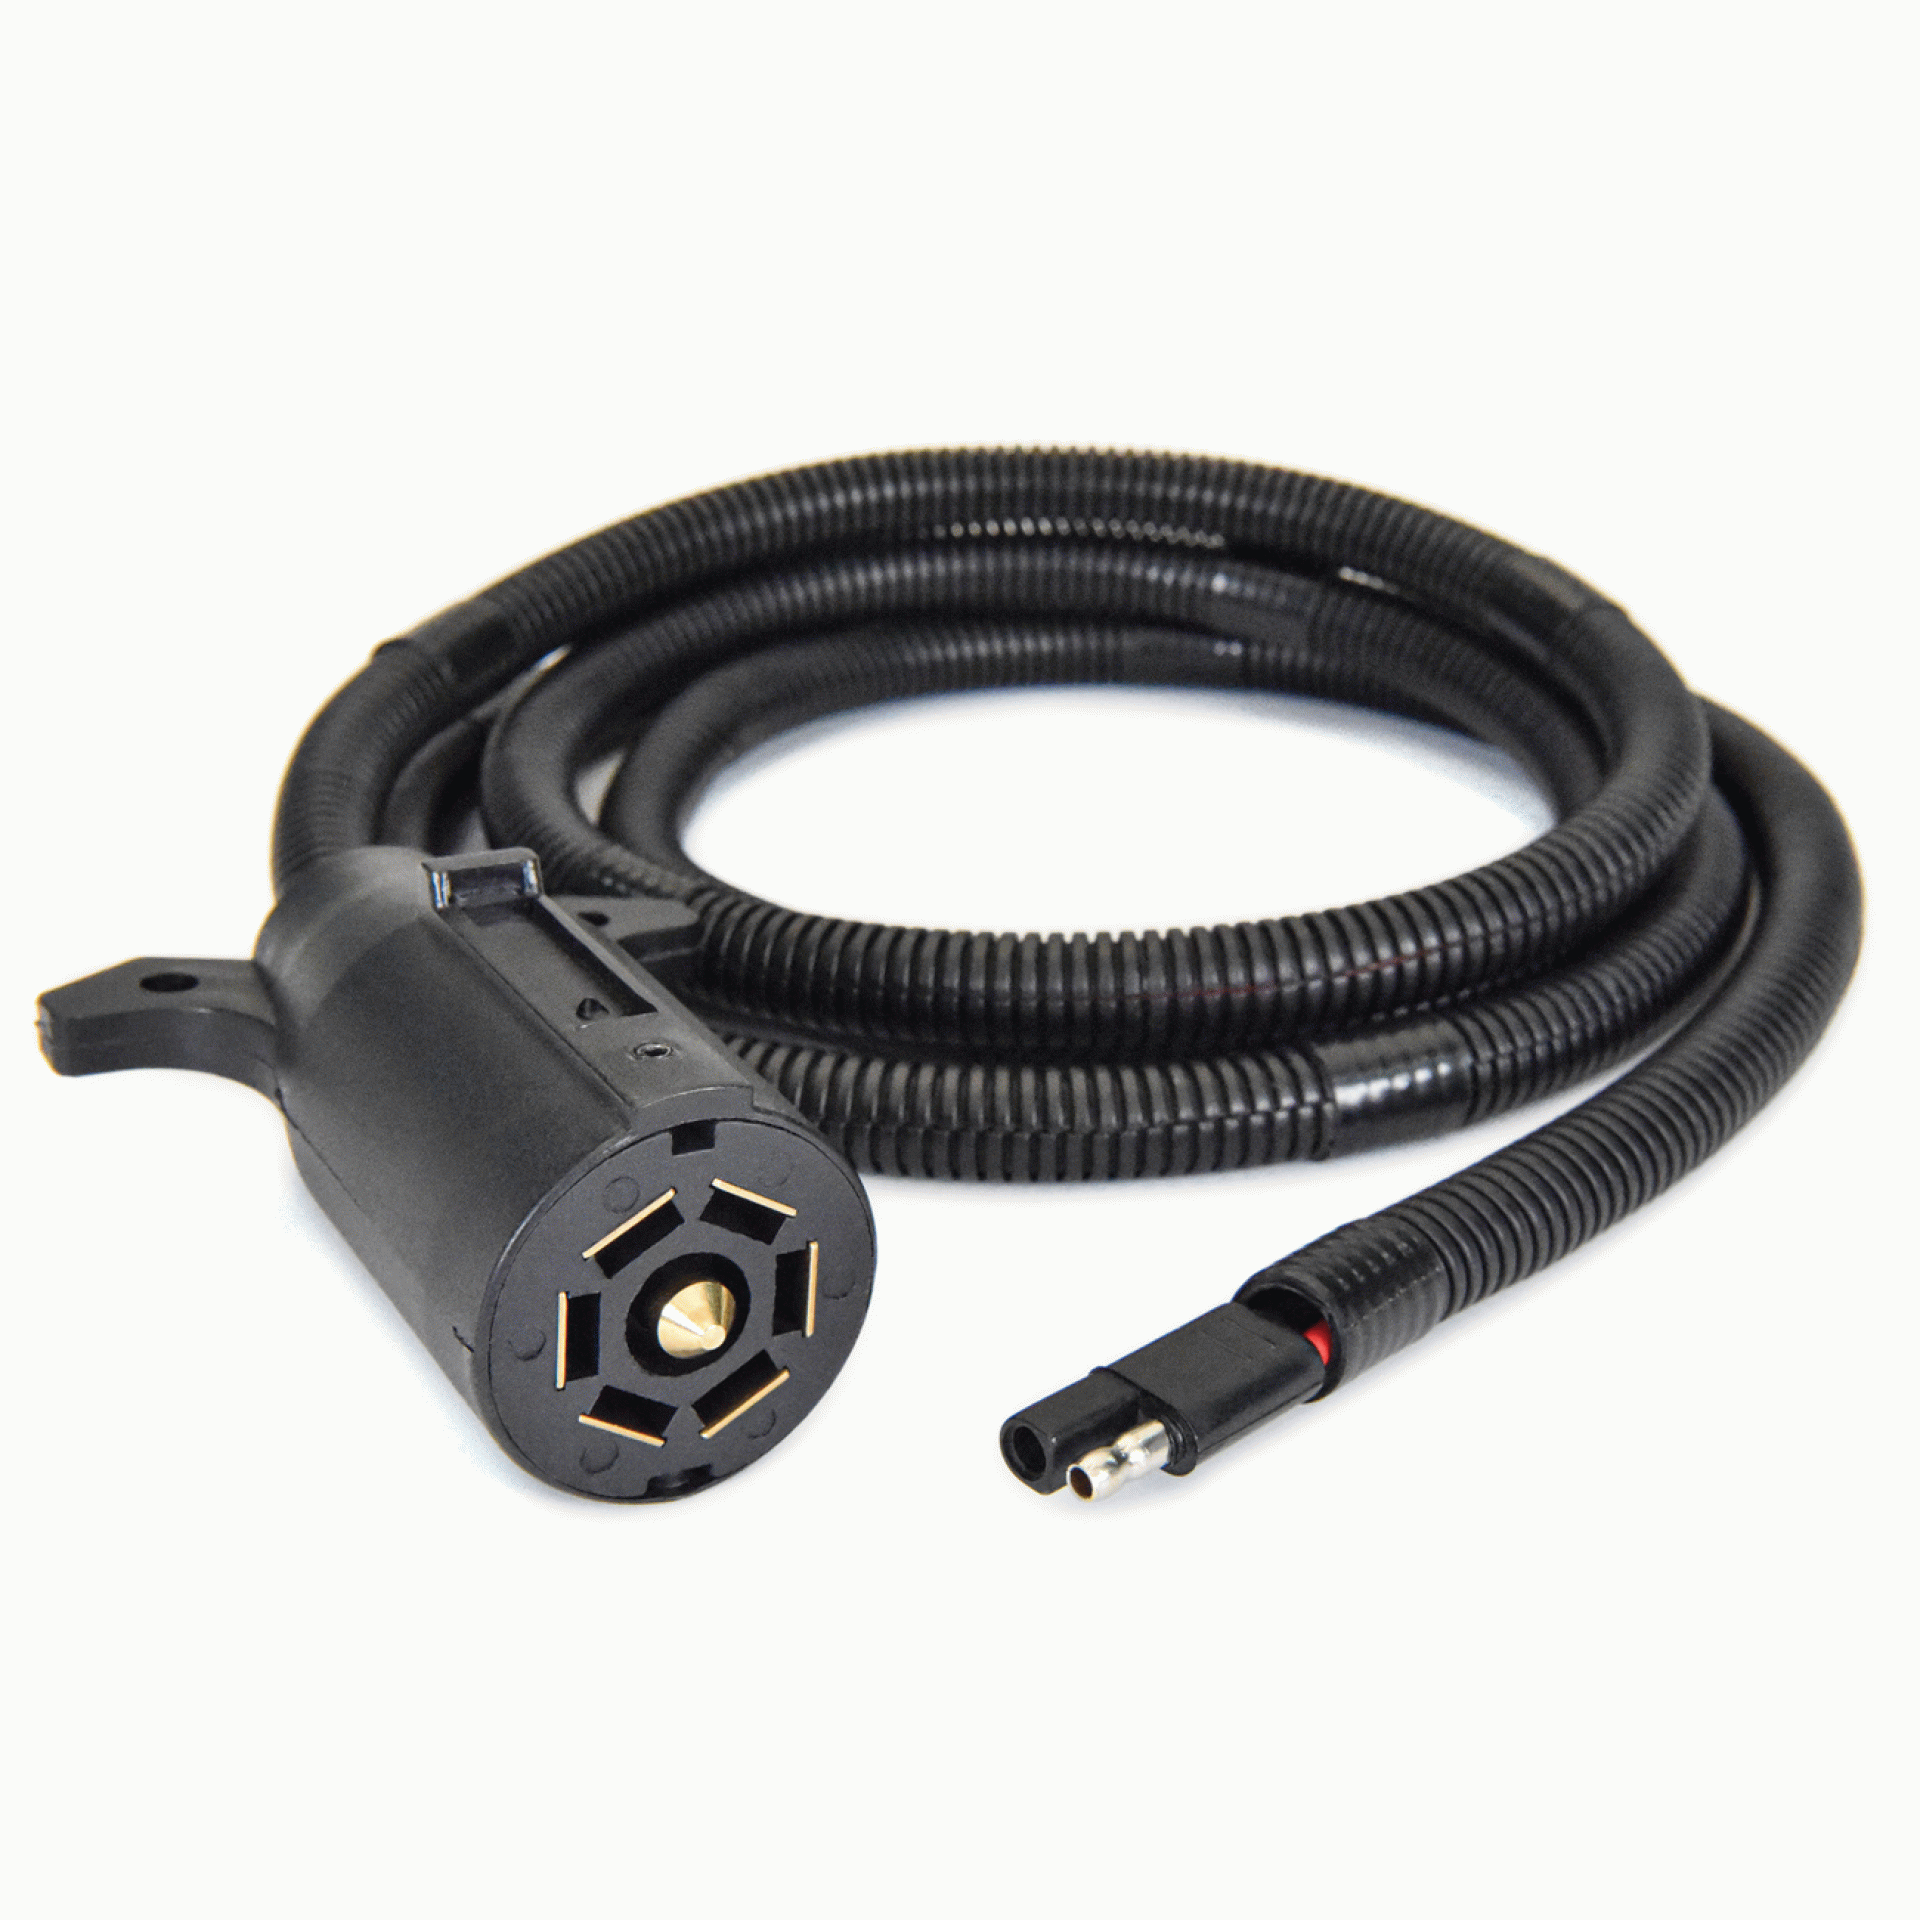 Lippert Components | 813749 | Swap Harness for Power Stance 3500